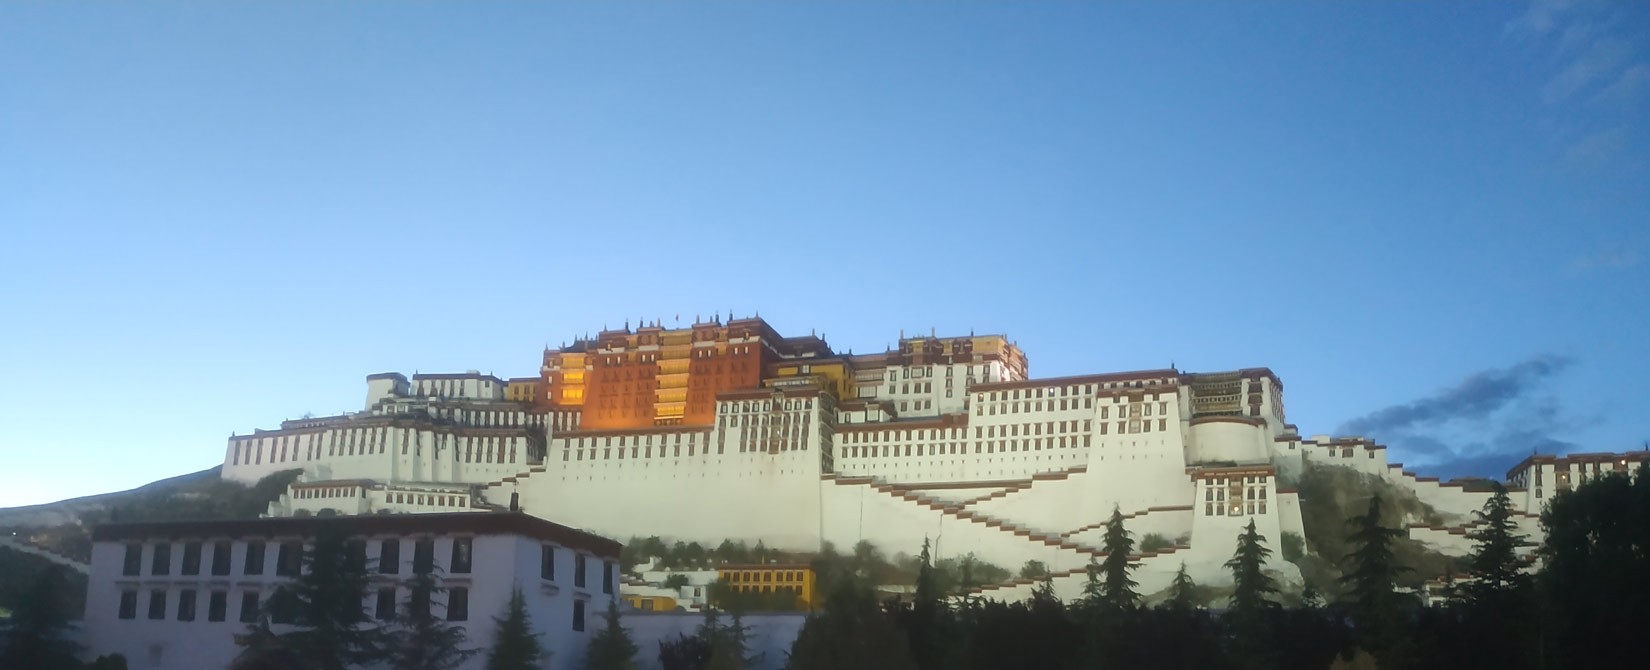 Potala place Buddhist monastery  in lhasa 